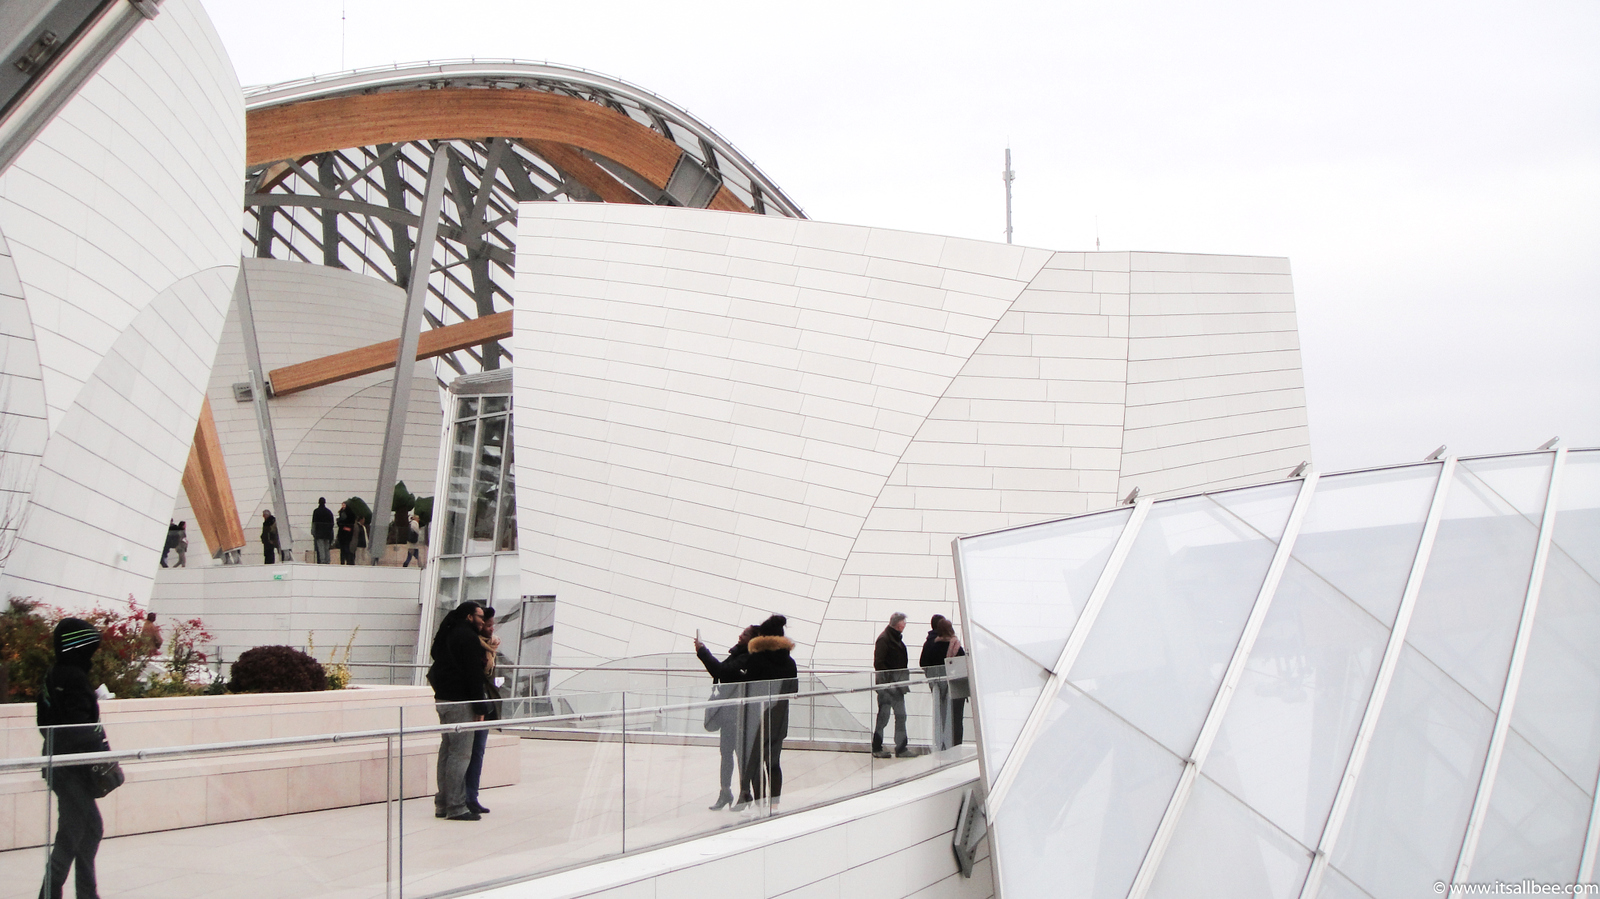 Foundation Louis Vuitton In Paris - Tips on Fondation Louis Vuitton Museum Tickets, opening Hours and Metro directions from Paris.